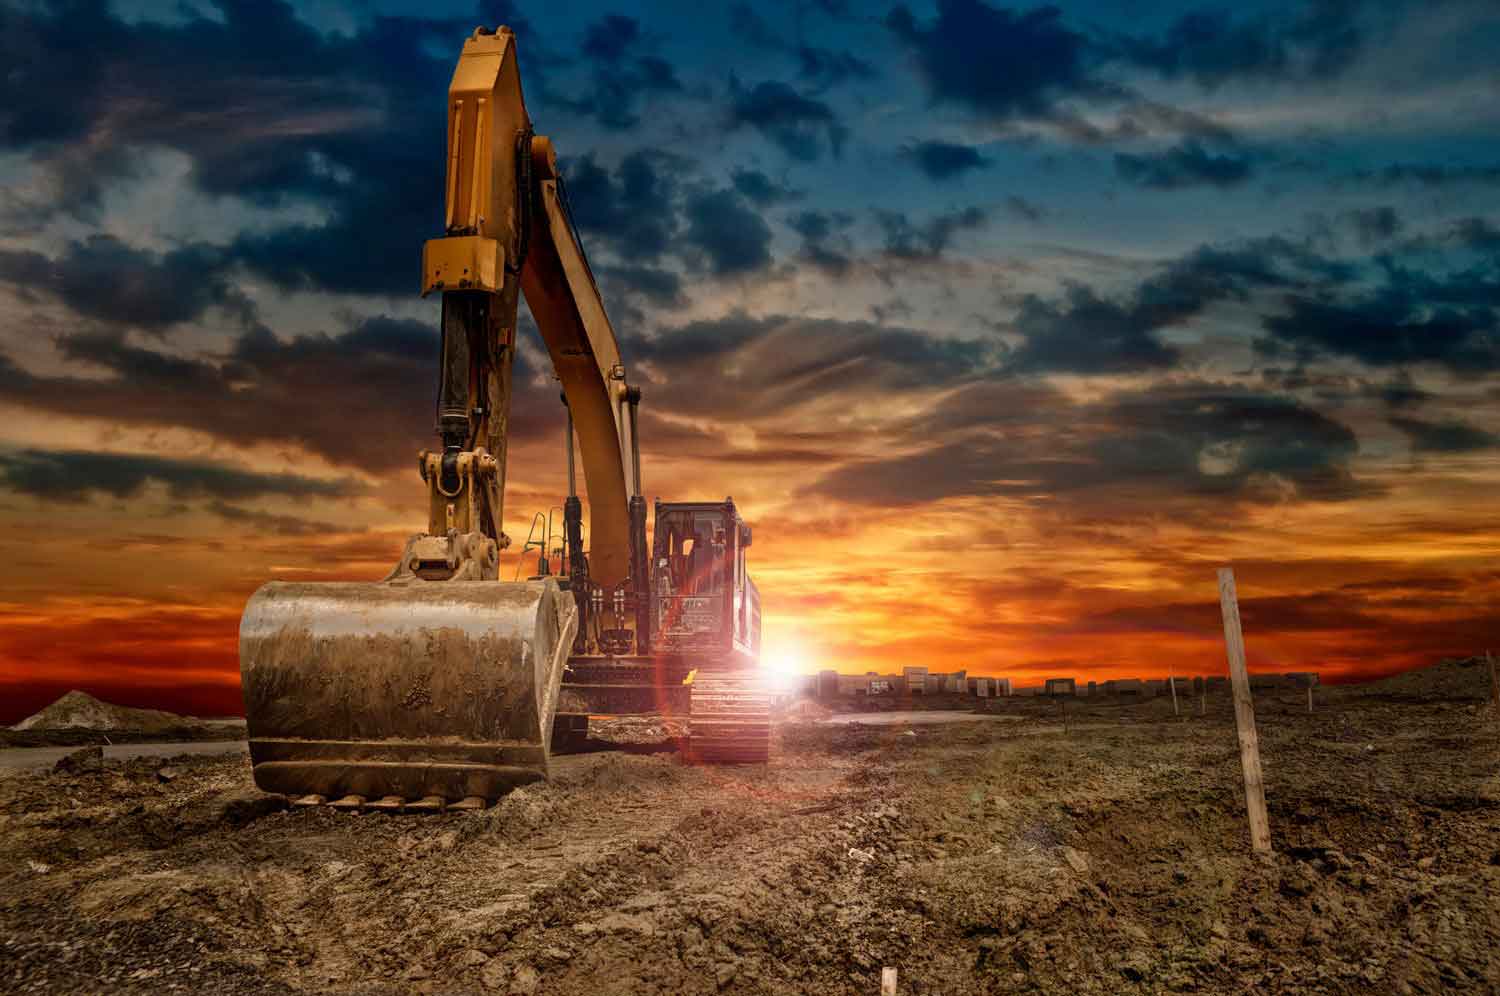 Excavating,Machinery,At,The,Construction,Site,,Sunset,In,Background.